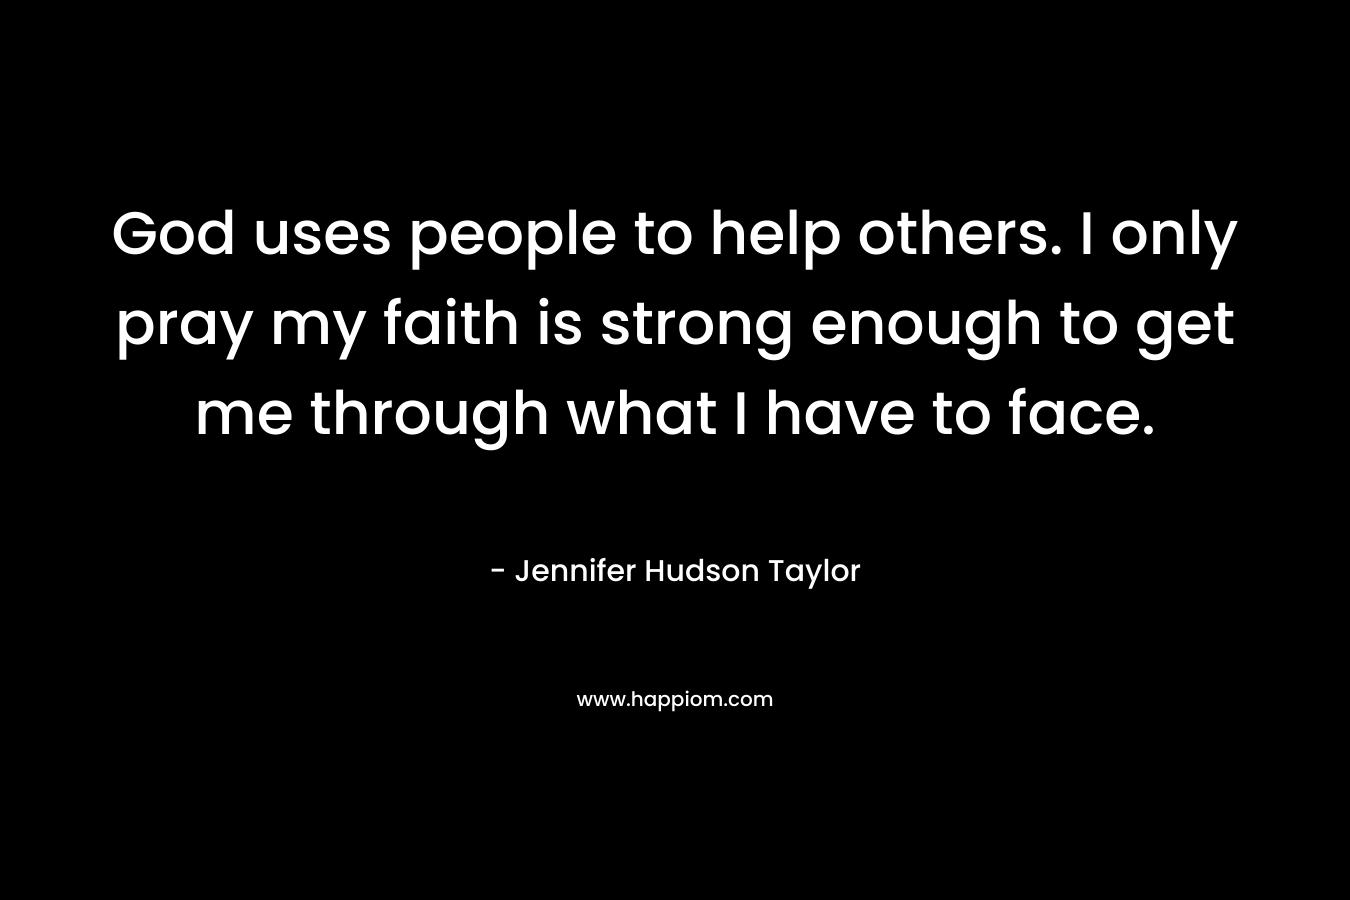 God uses people to help others. I only pray my faith is strong enough to get me through what I have to face.